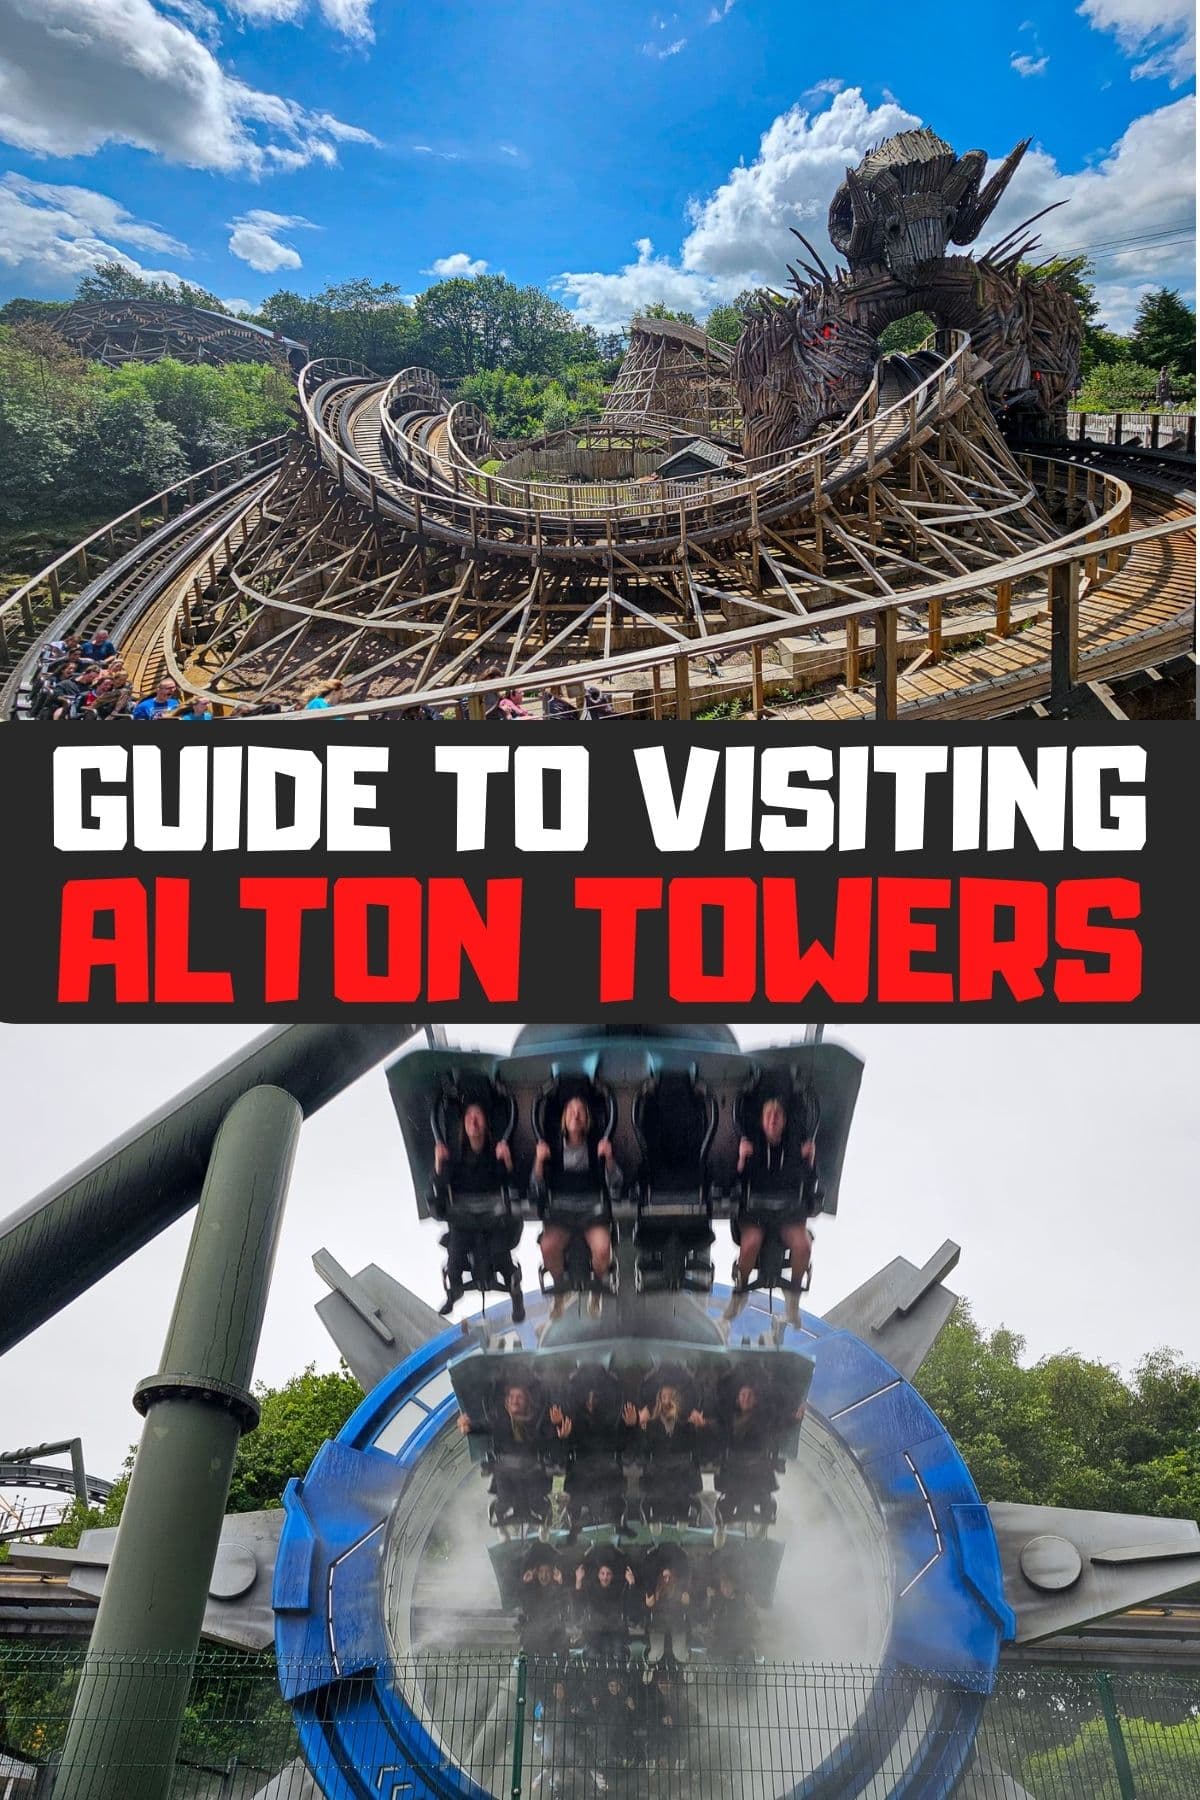 A detailed guide to visiting Alton Towers. Information on tickets, ride, fastpass, accommodation, food and more!